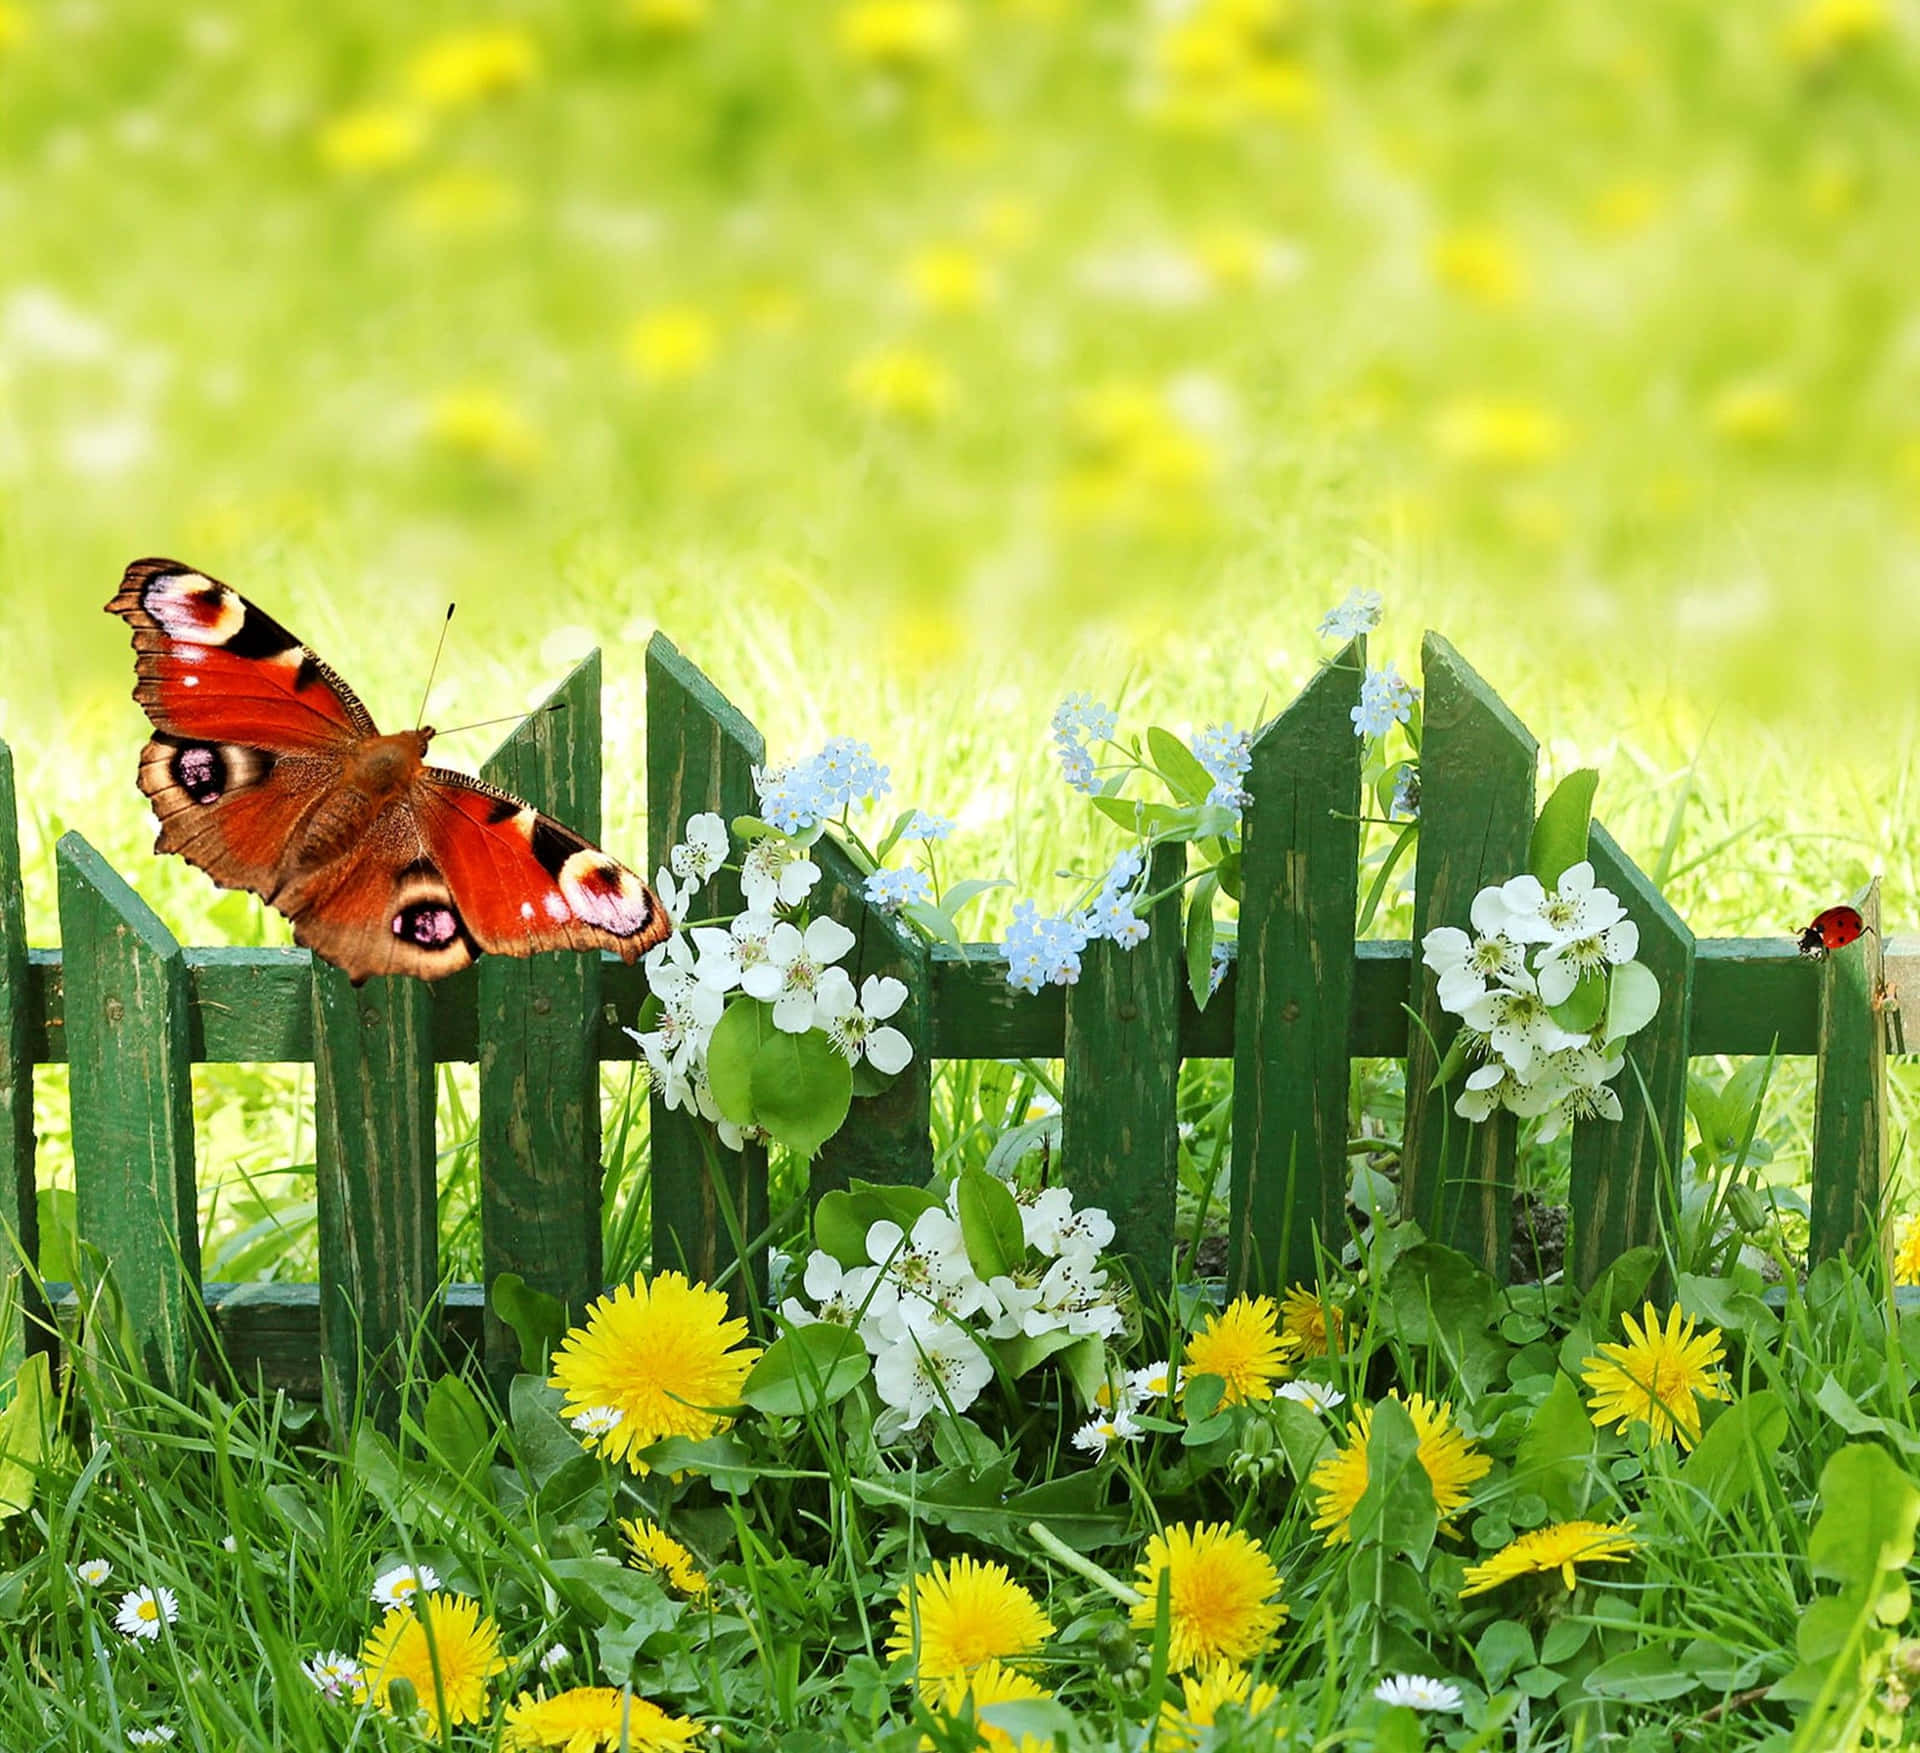 Butterfly On A Fence With Dandelions And Yellow Flowers